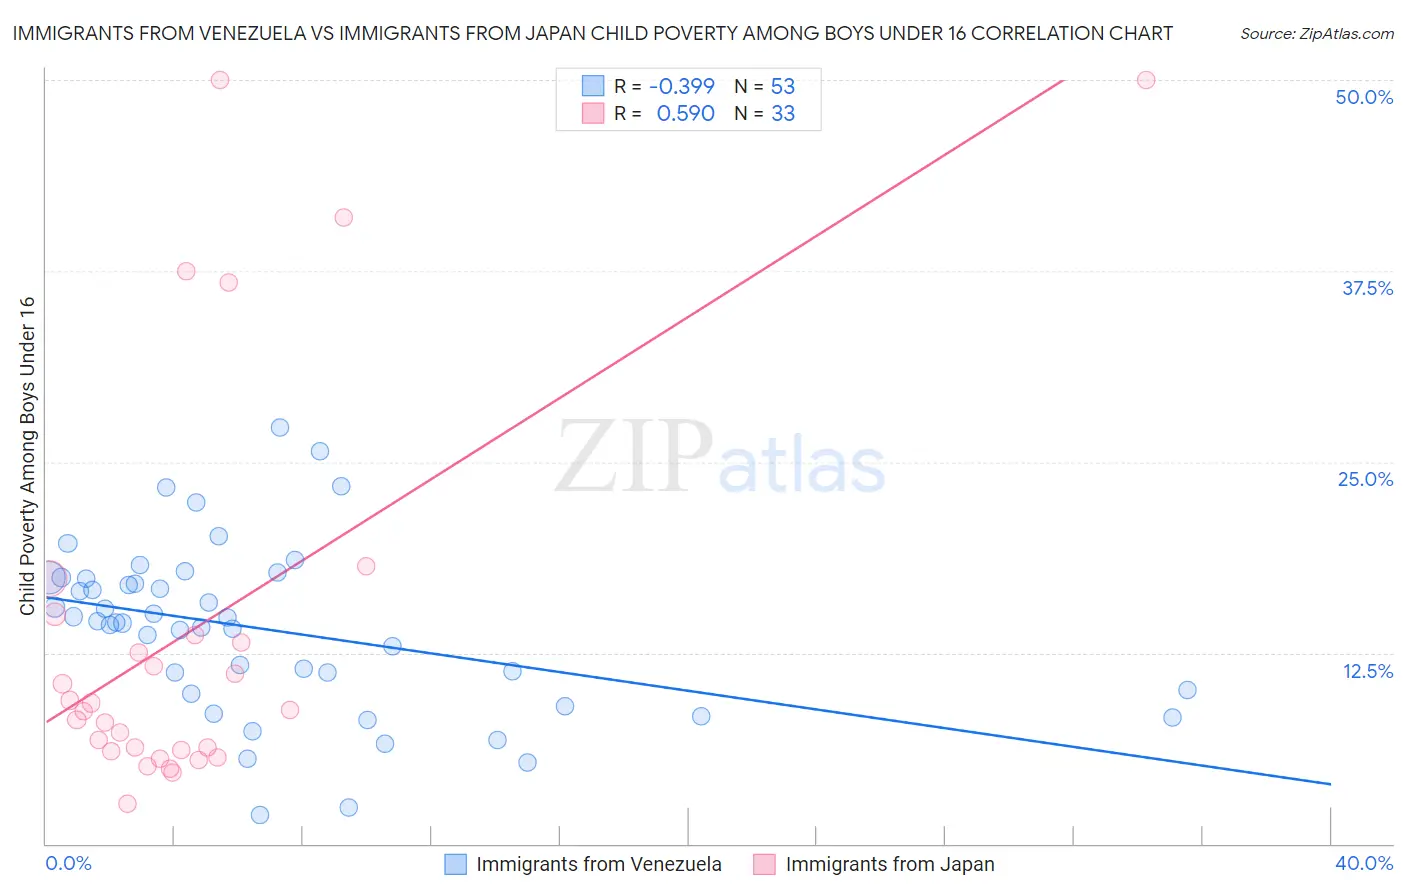 Immigrants from Venezuela vs Immigrants from Japan Child Poverty Among Boys Under 16